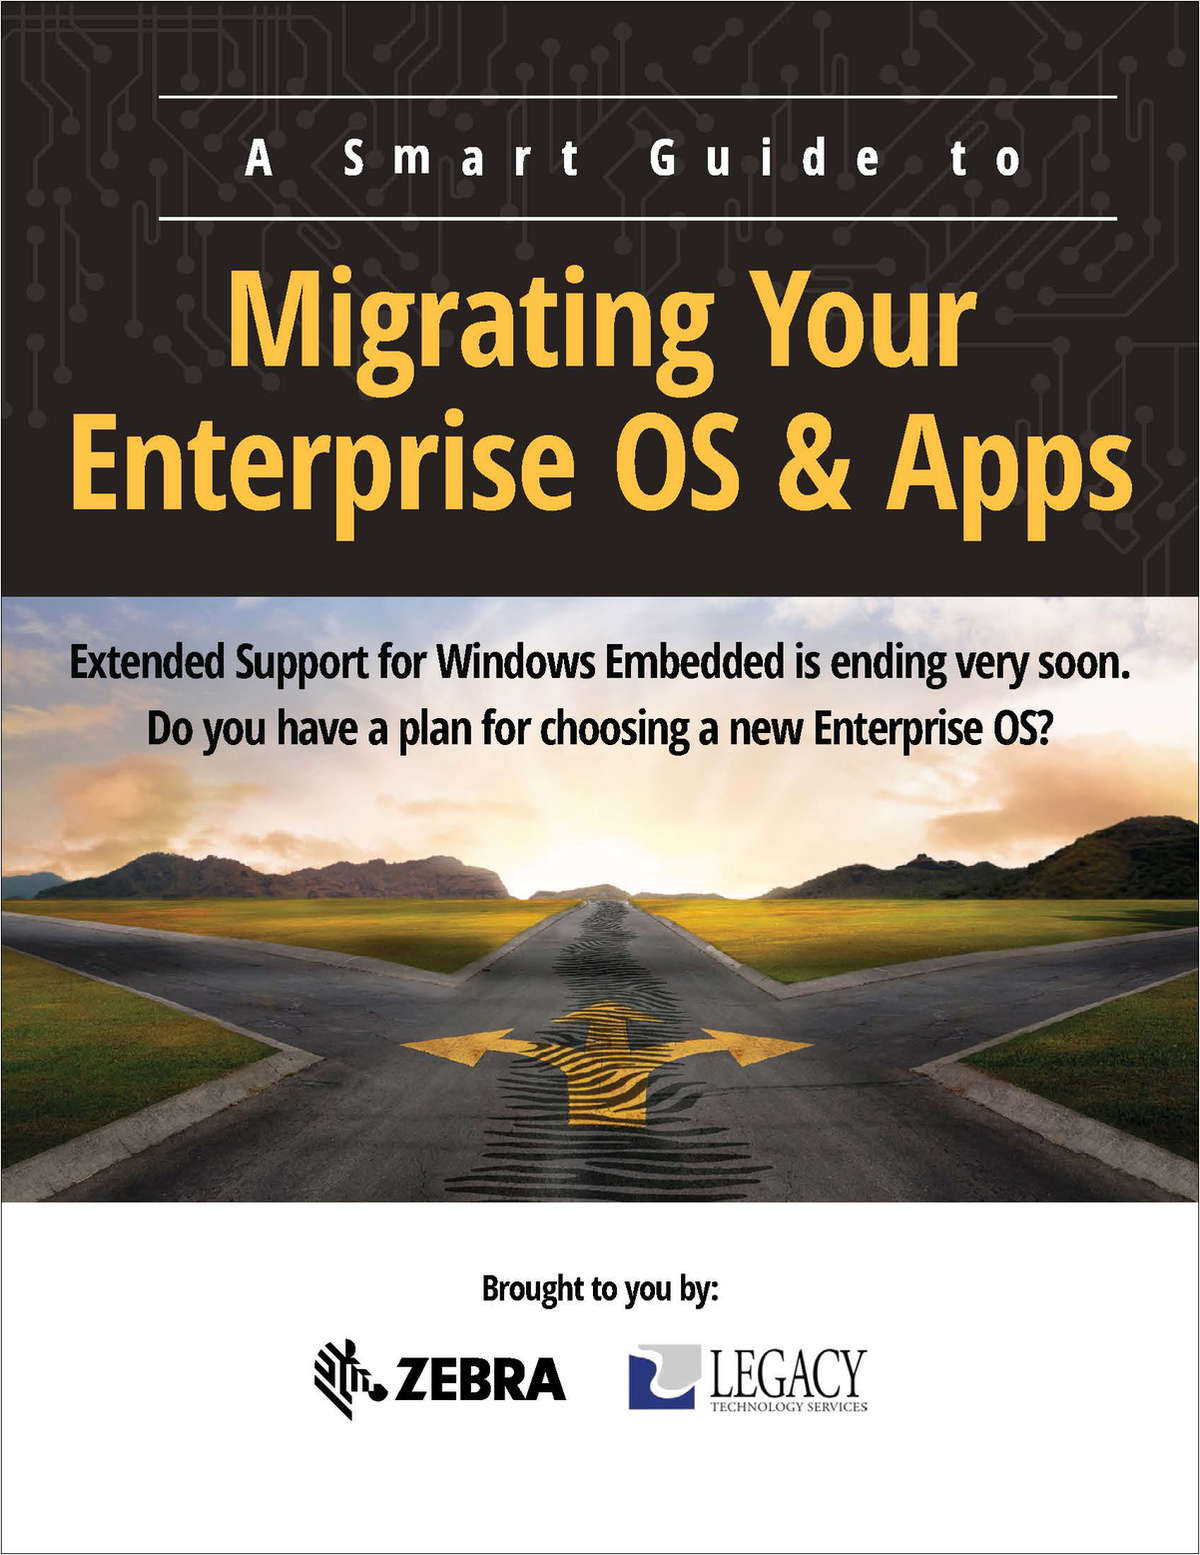 The Smart Guide to Migrating Your Enterprise OS & Apps